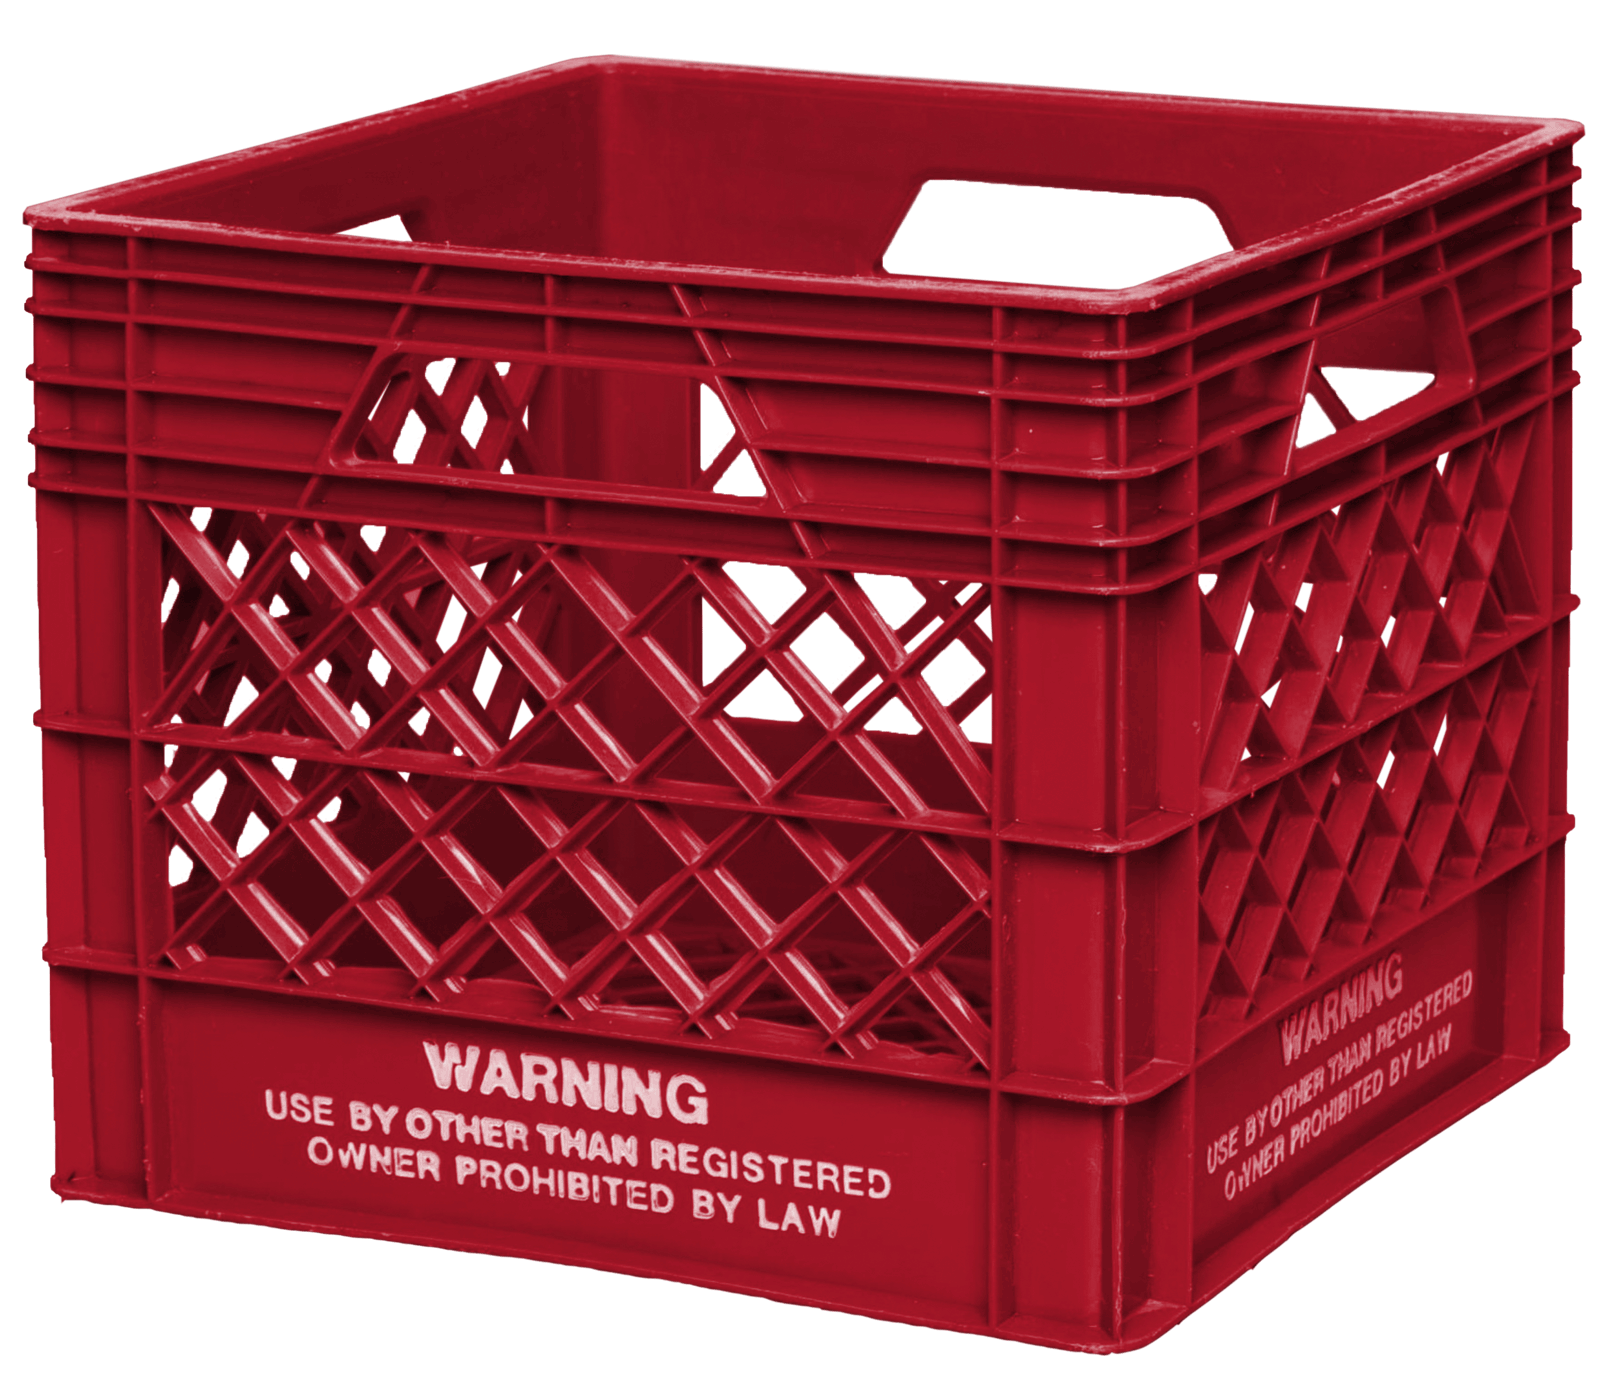 Milk Crate History: Too Well-Made Not to Steal